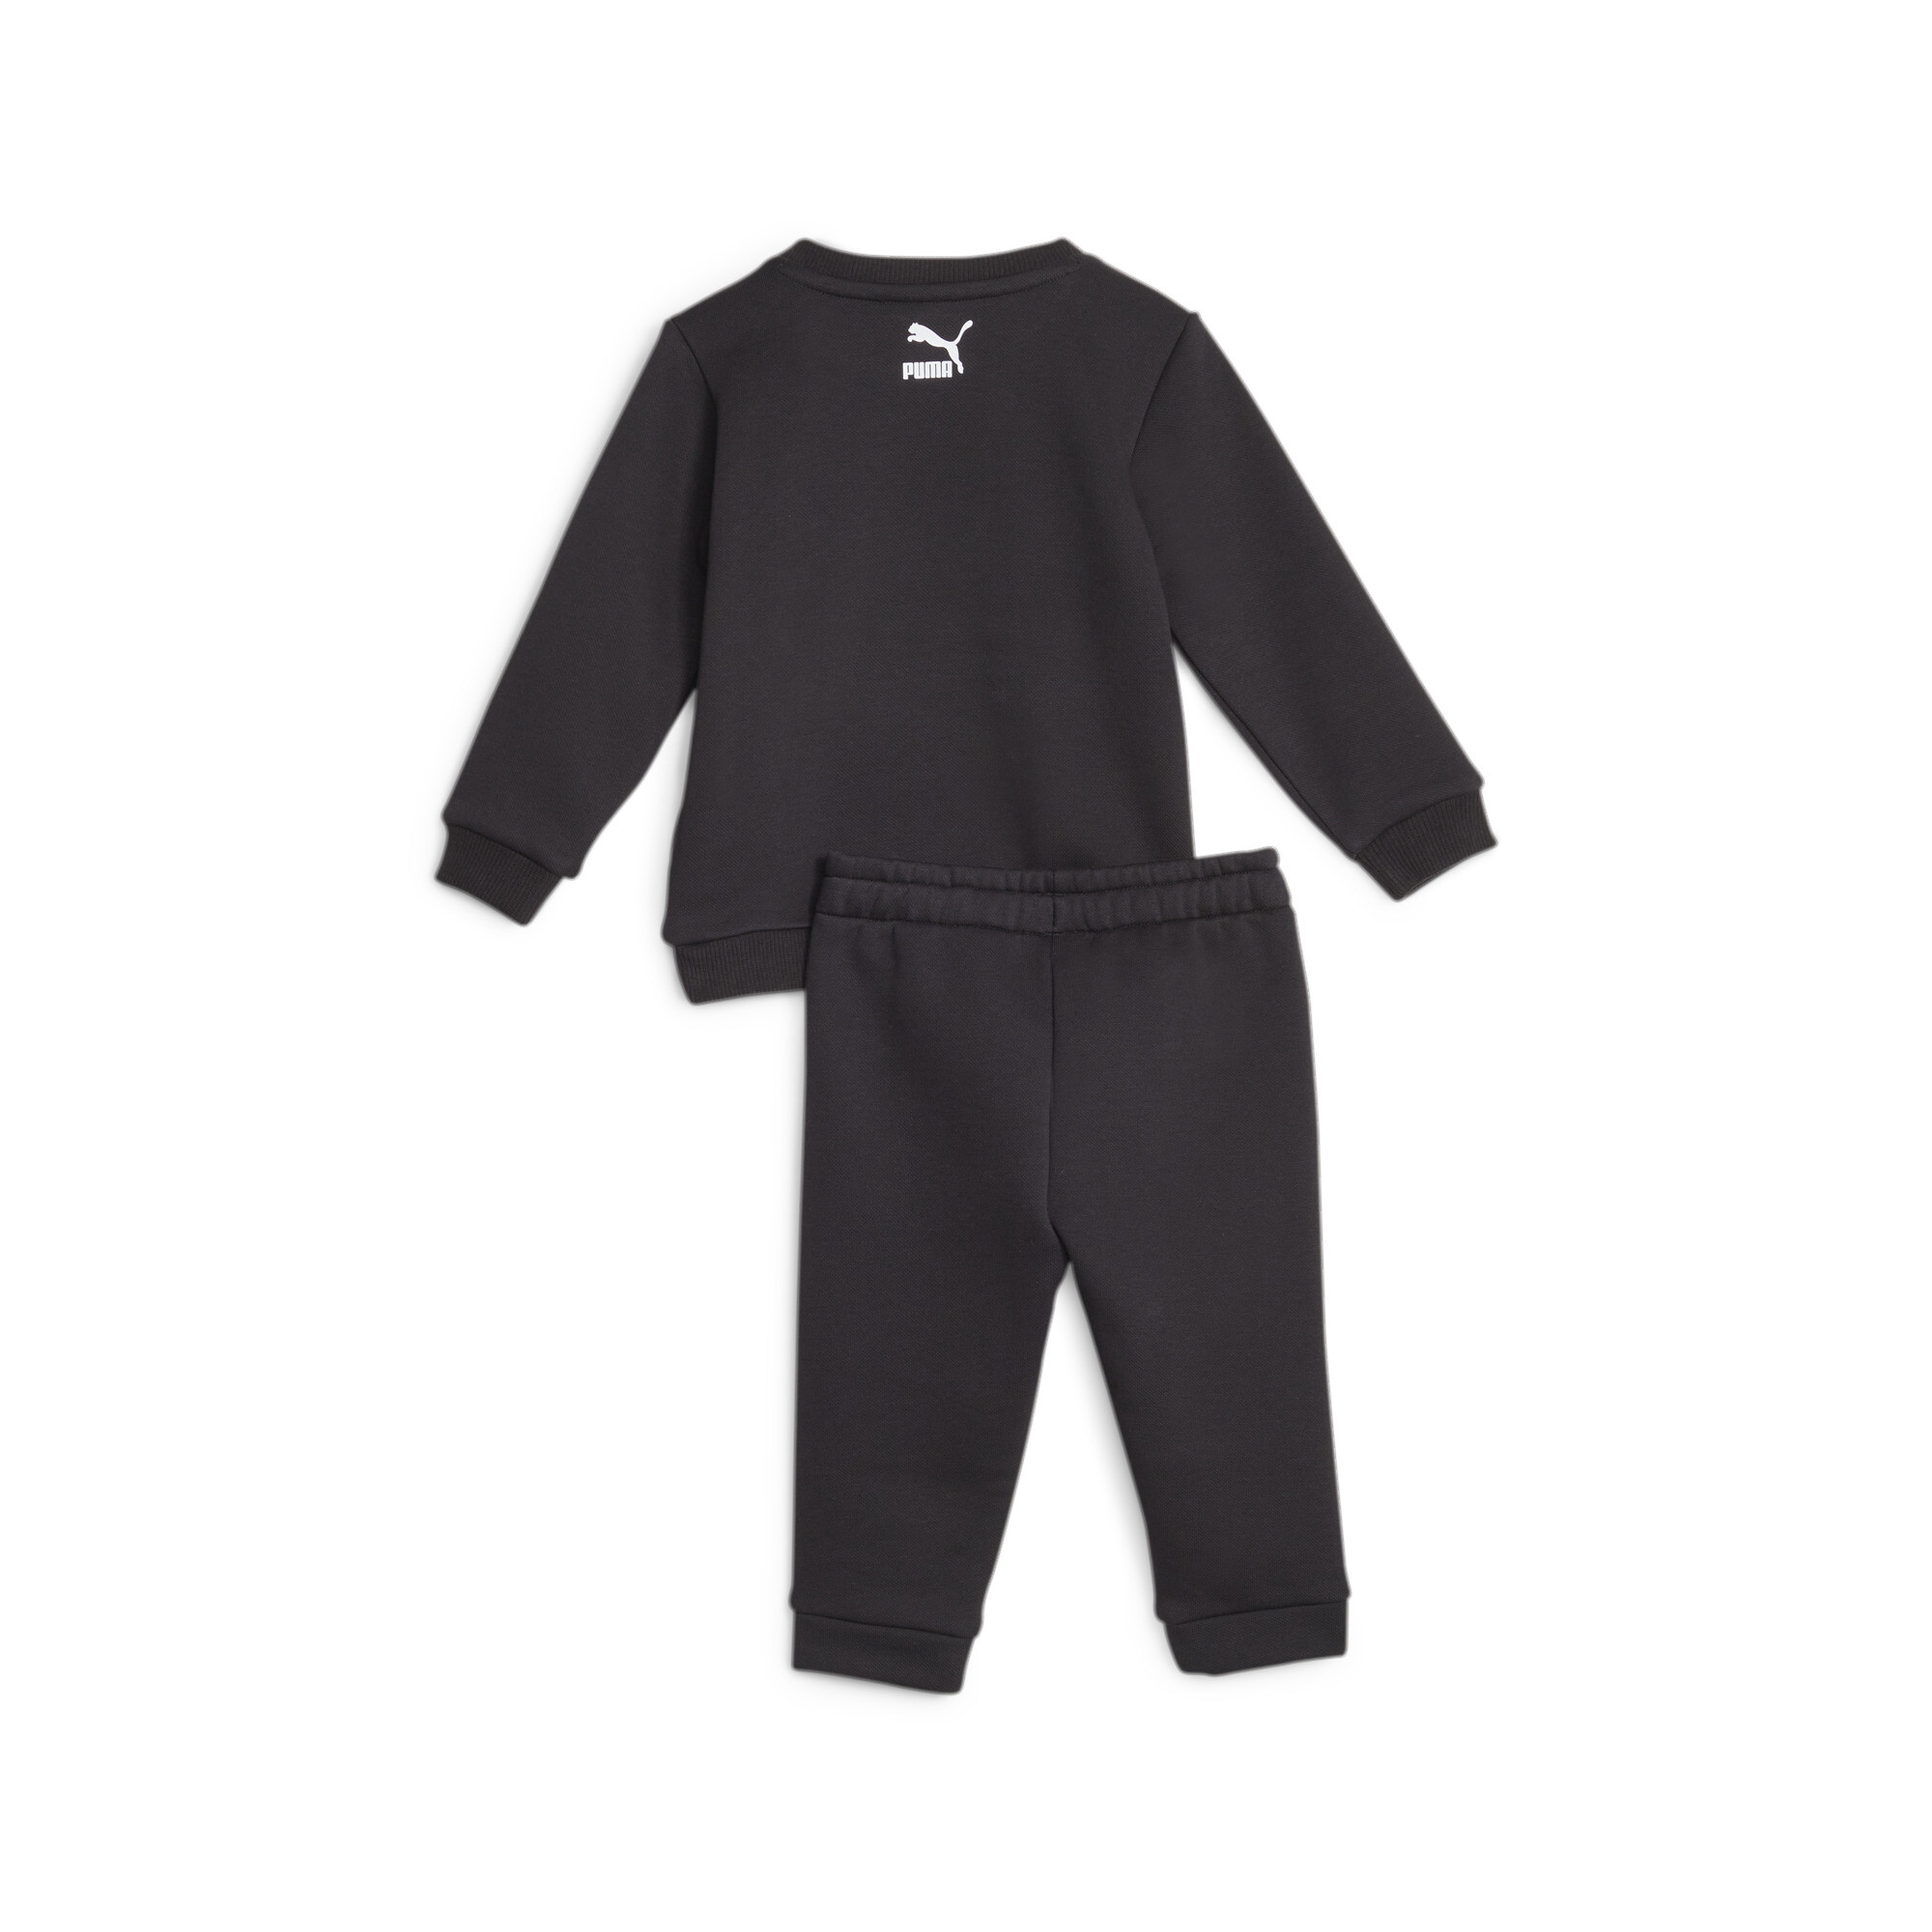 Puma X MIRACULOUS Toddlers' Jogger, Black, Size 6-9M, Clothing